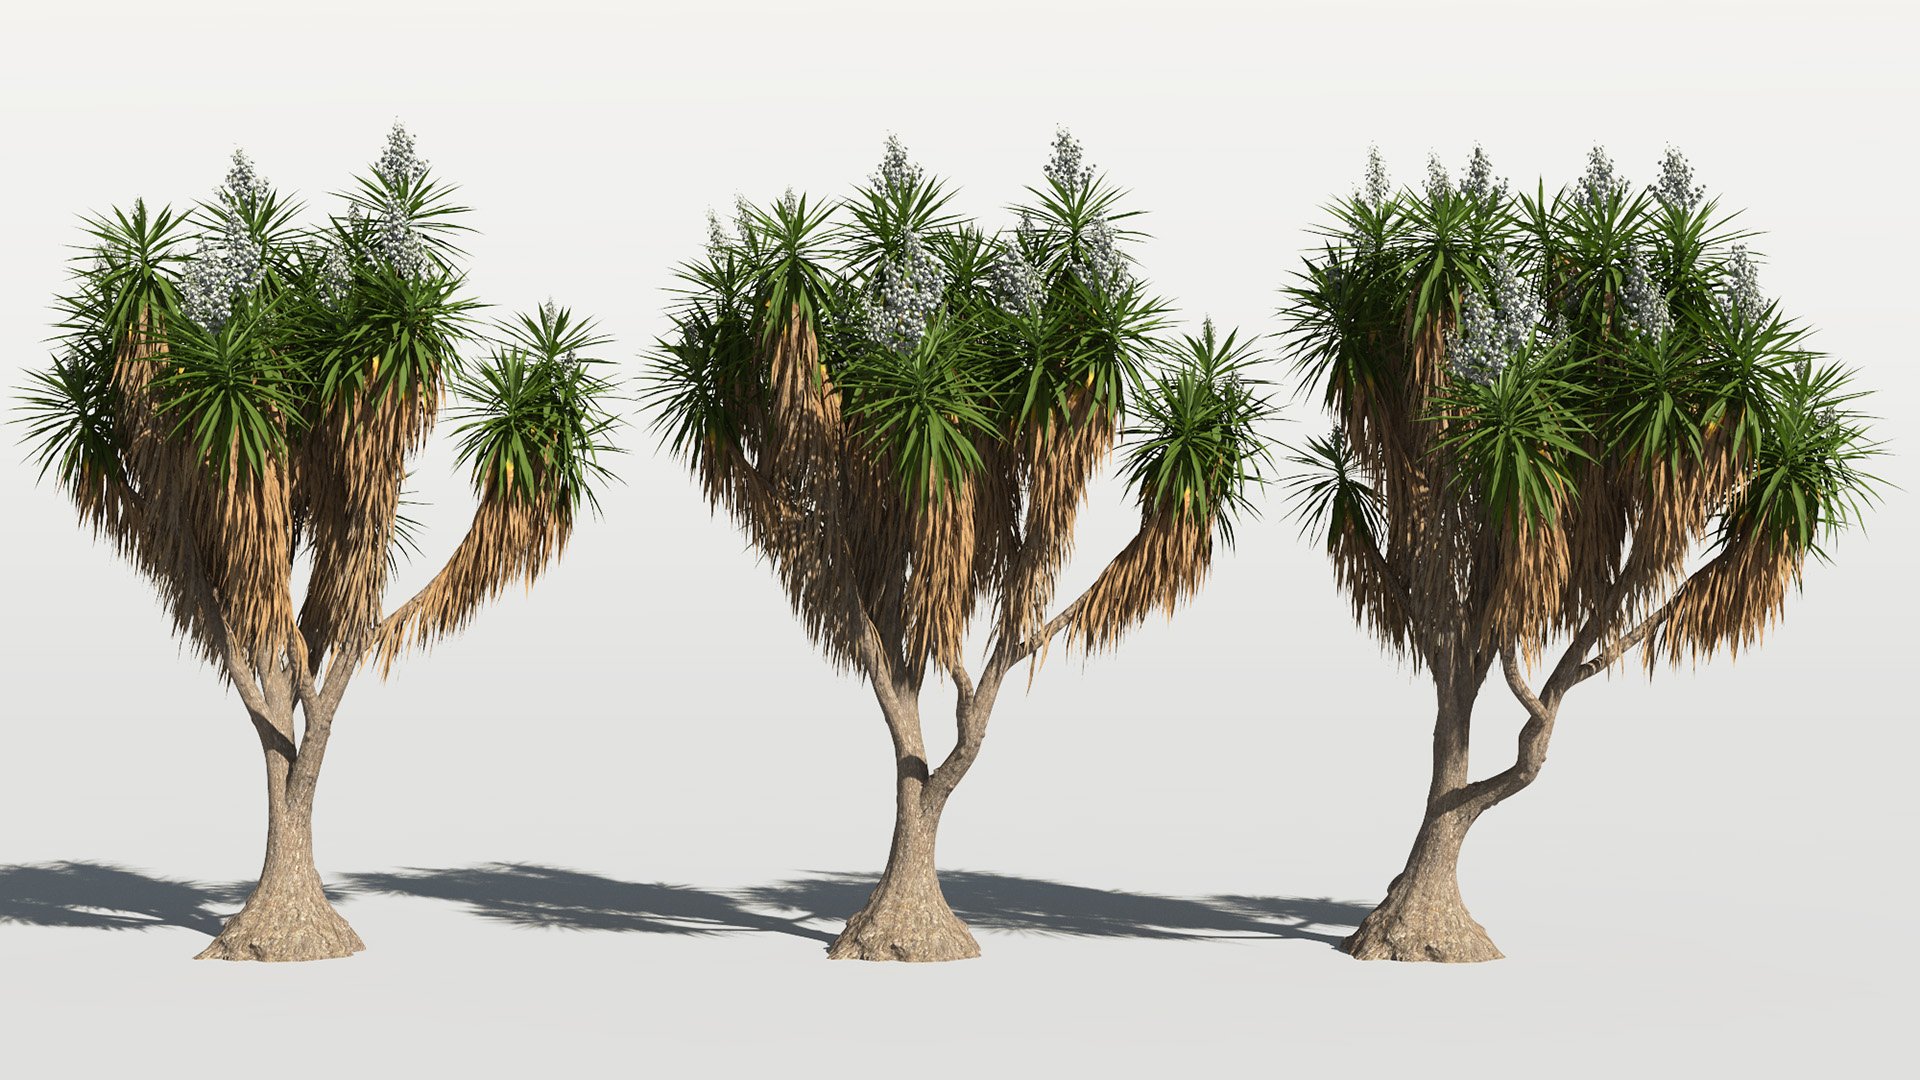 3D model of the Spineless yucca Yucca elephantipes